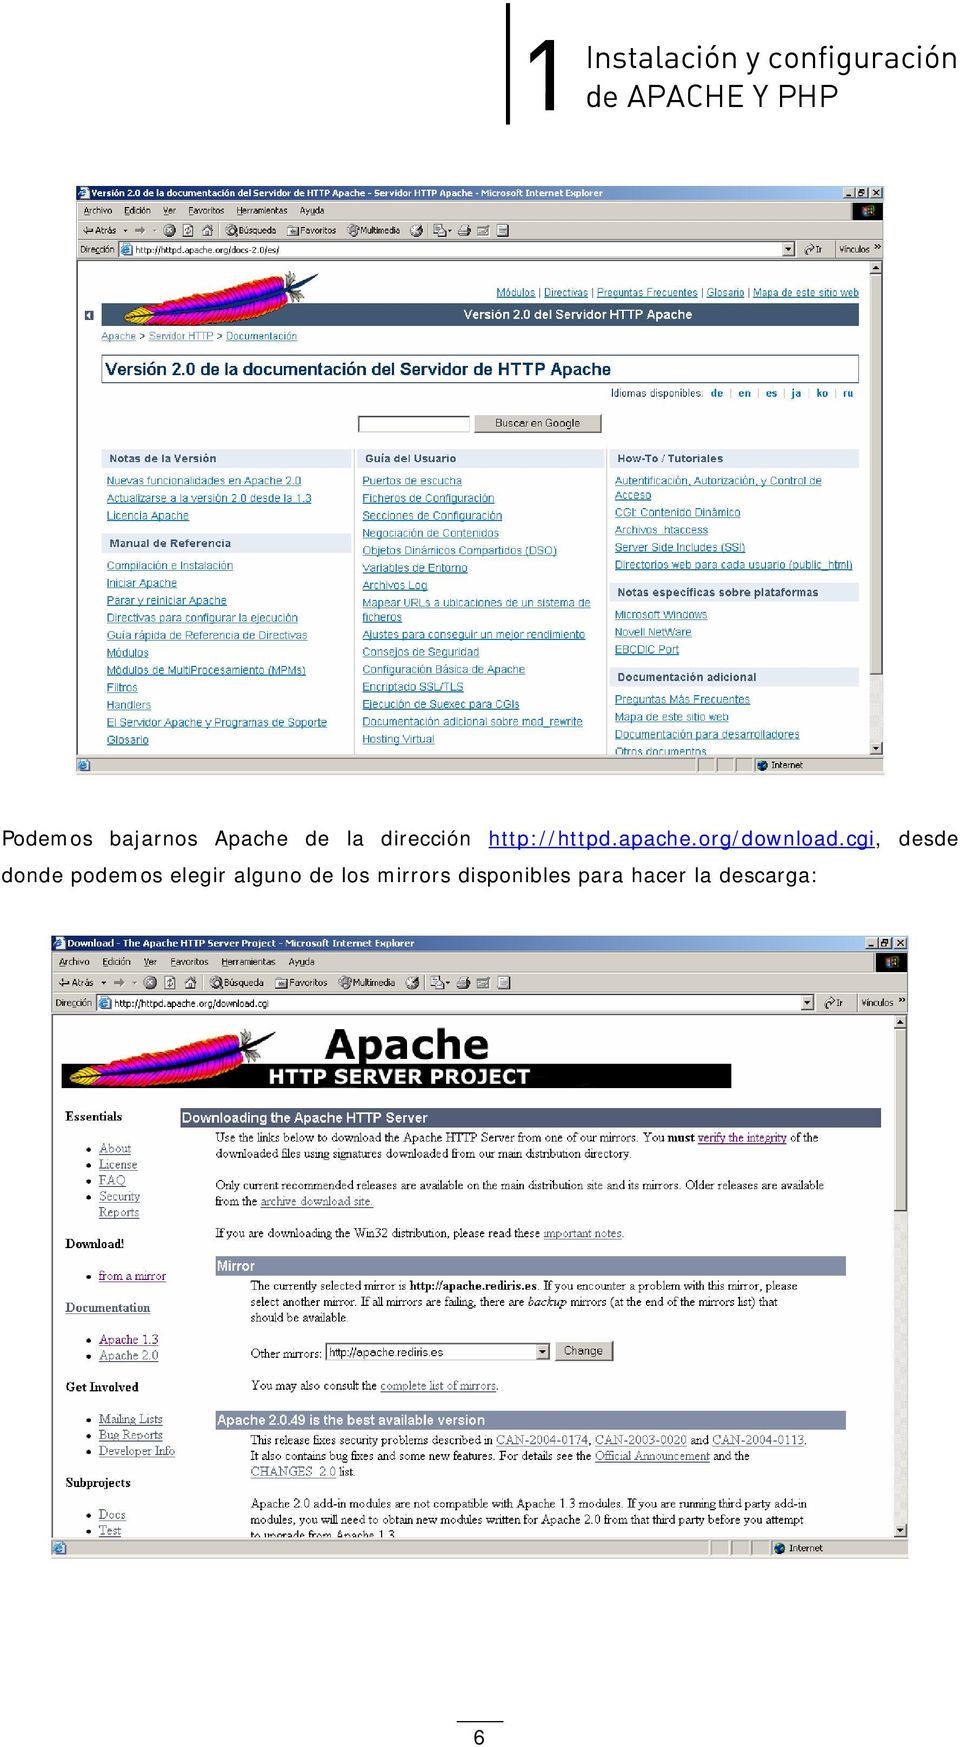 apache.org/download.